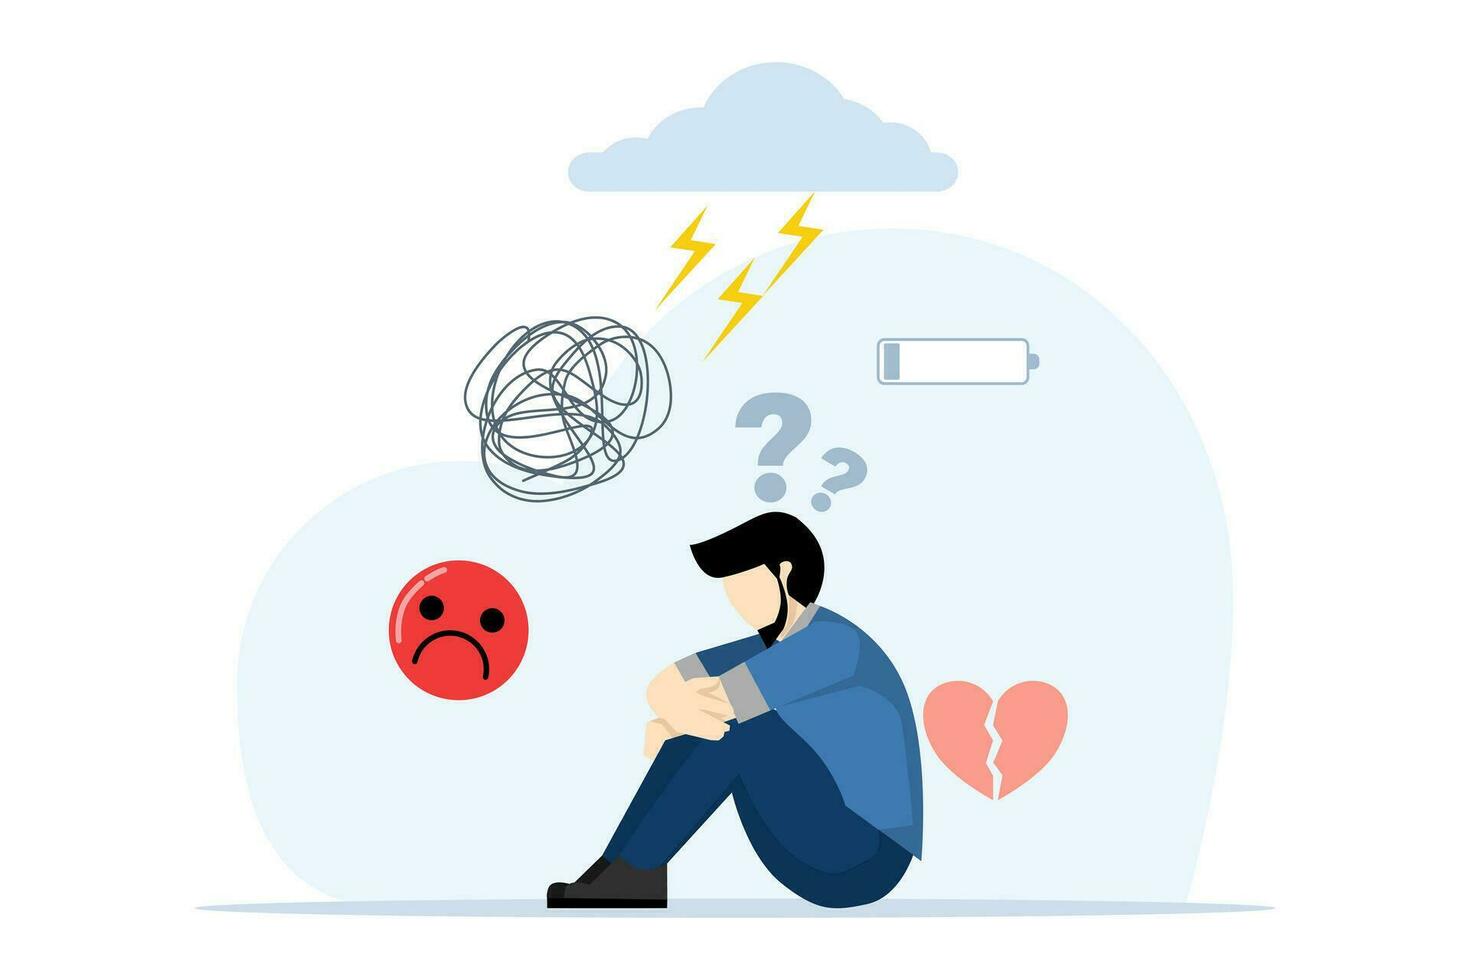 Mental depression concept. depressed person sitting on the floor. Mental health and psychotherapy concept. Anxiety, stress, emotional exhaustion and other psychological problems. vector illustration.